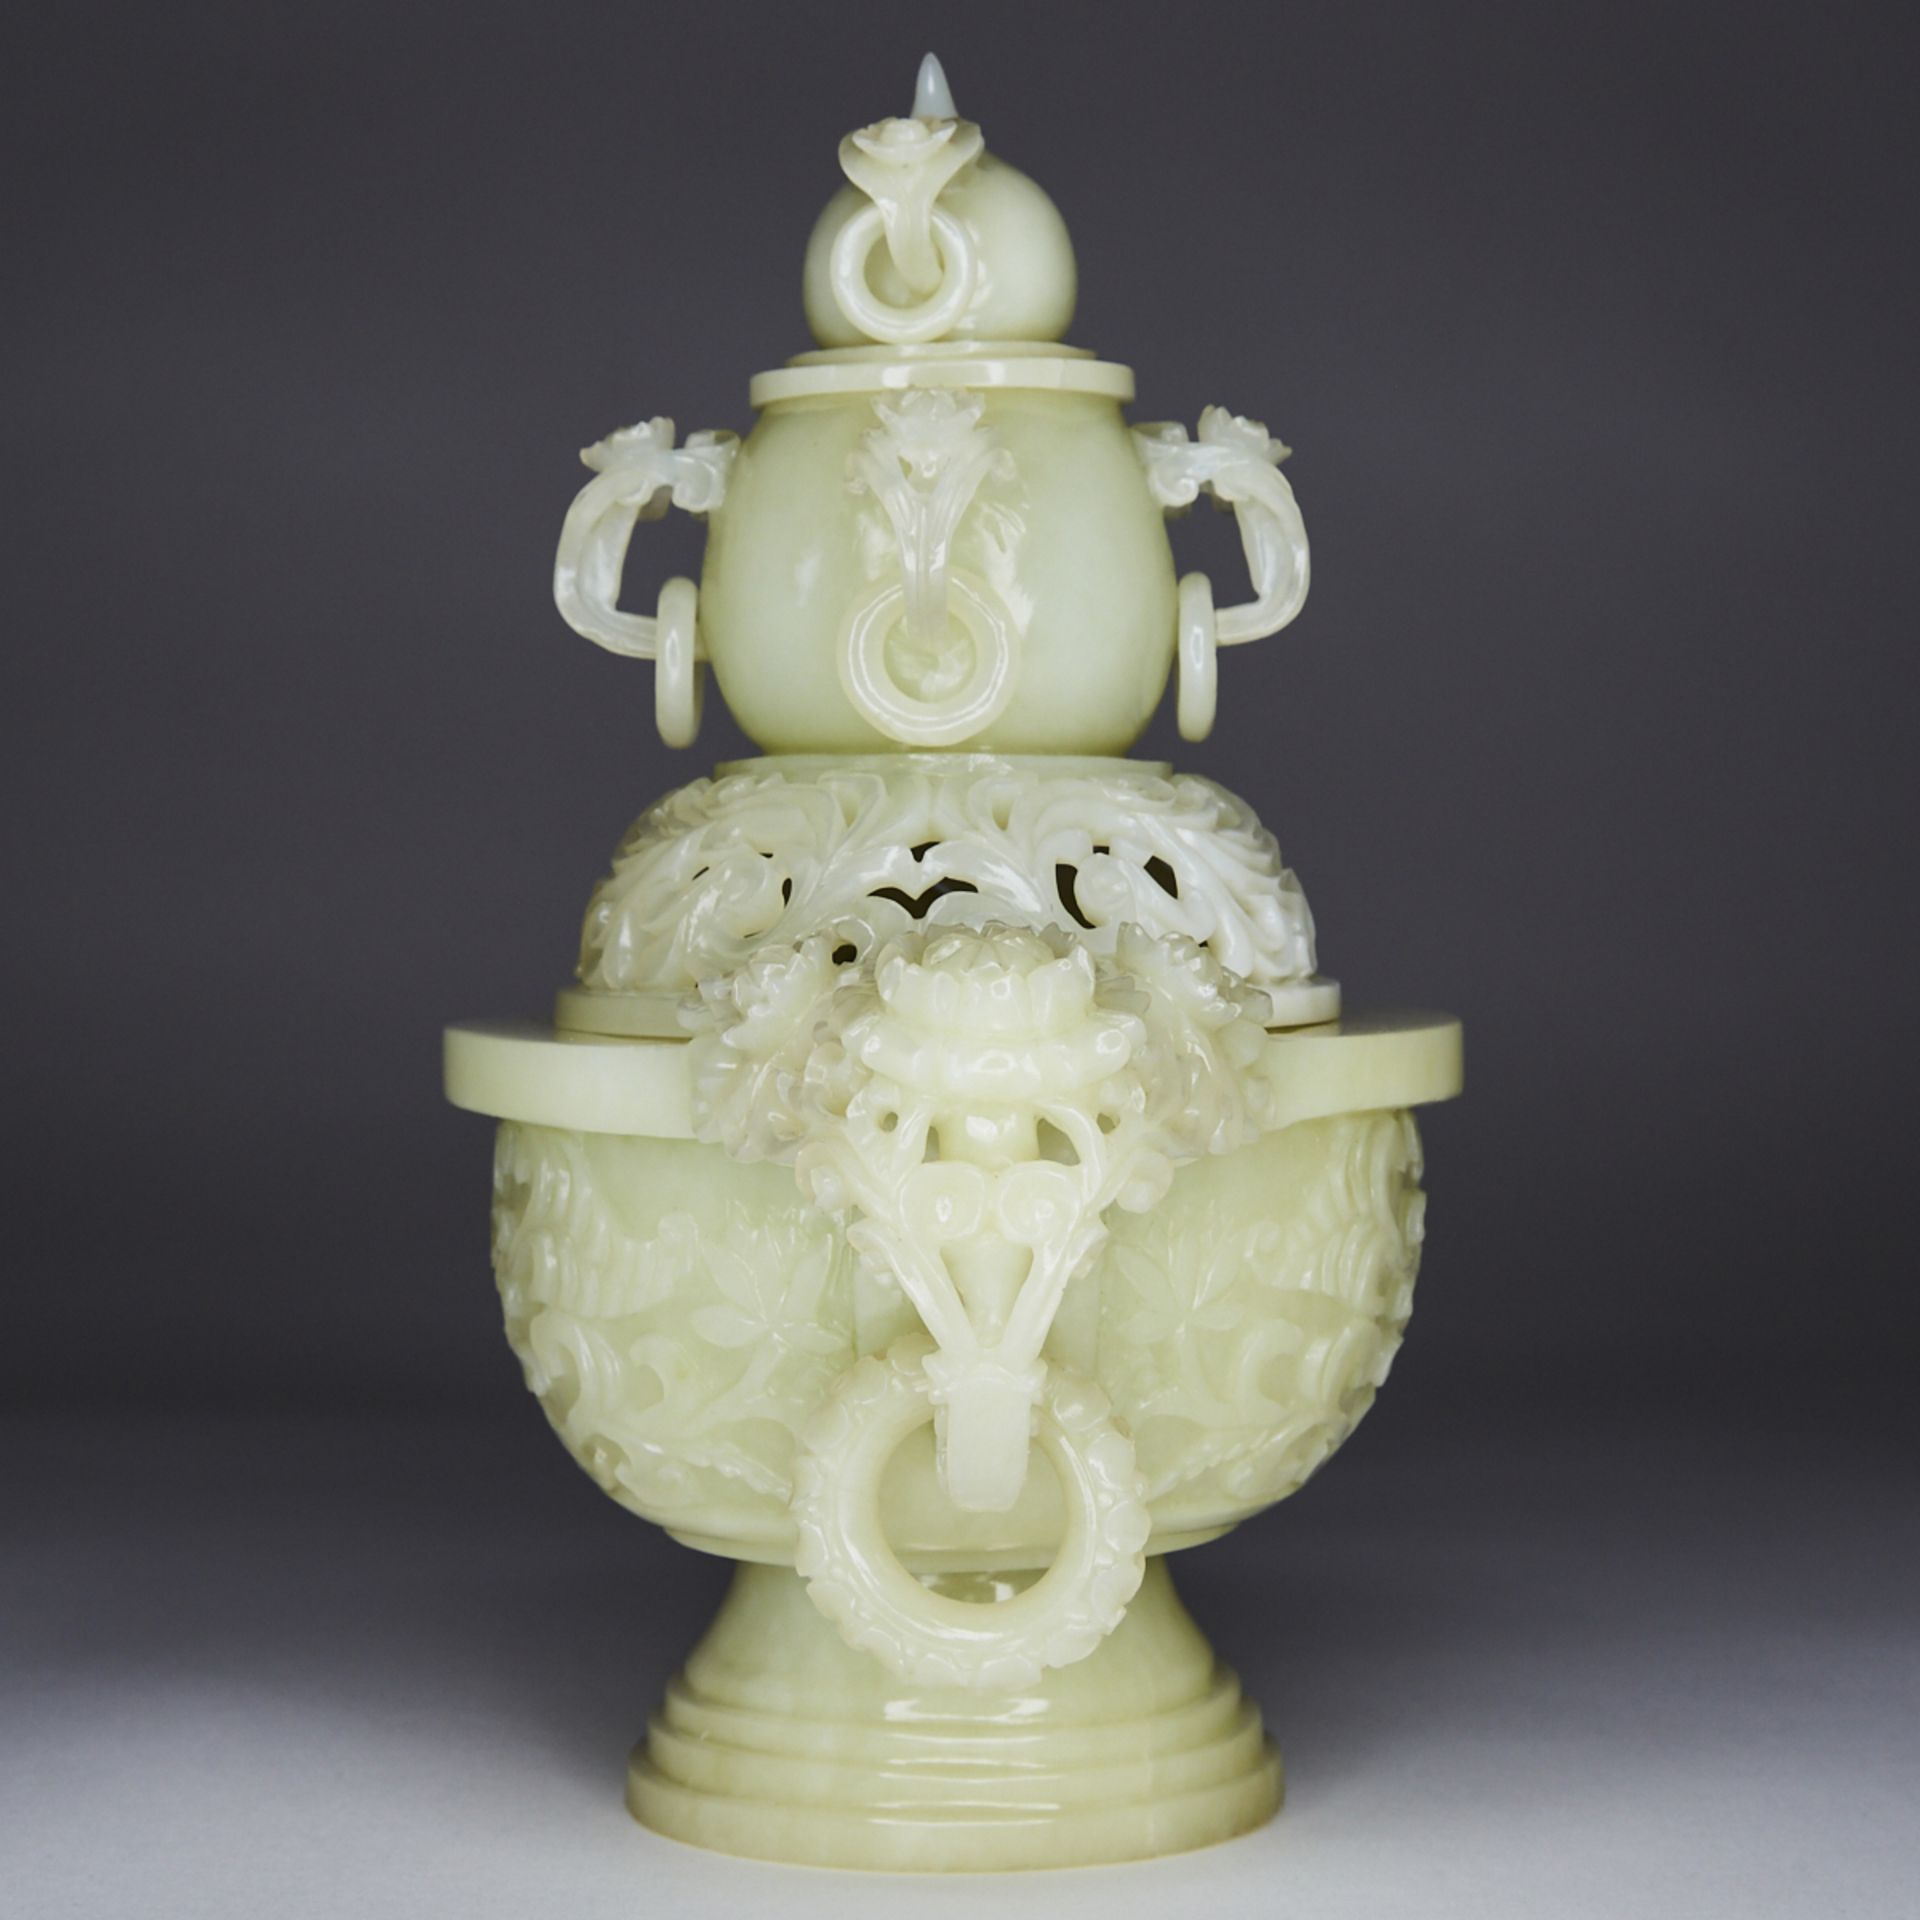 20th c. Chinese Carved Jade Lidded Vase - Image 4 of 6